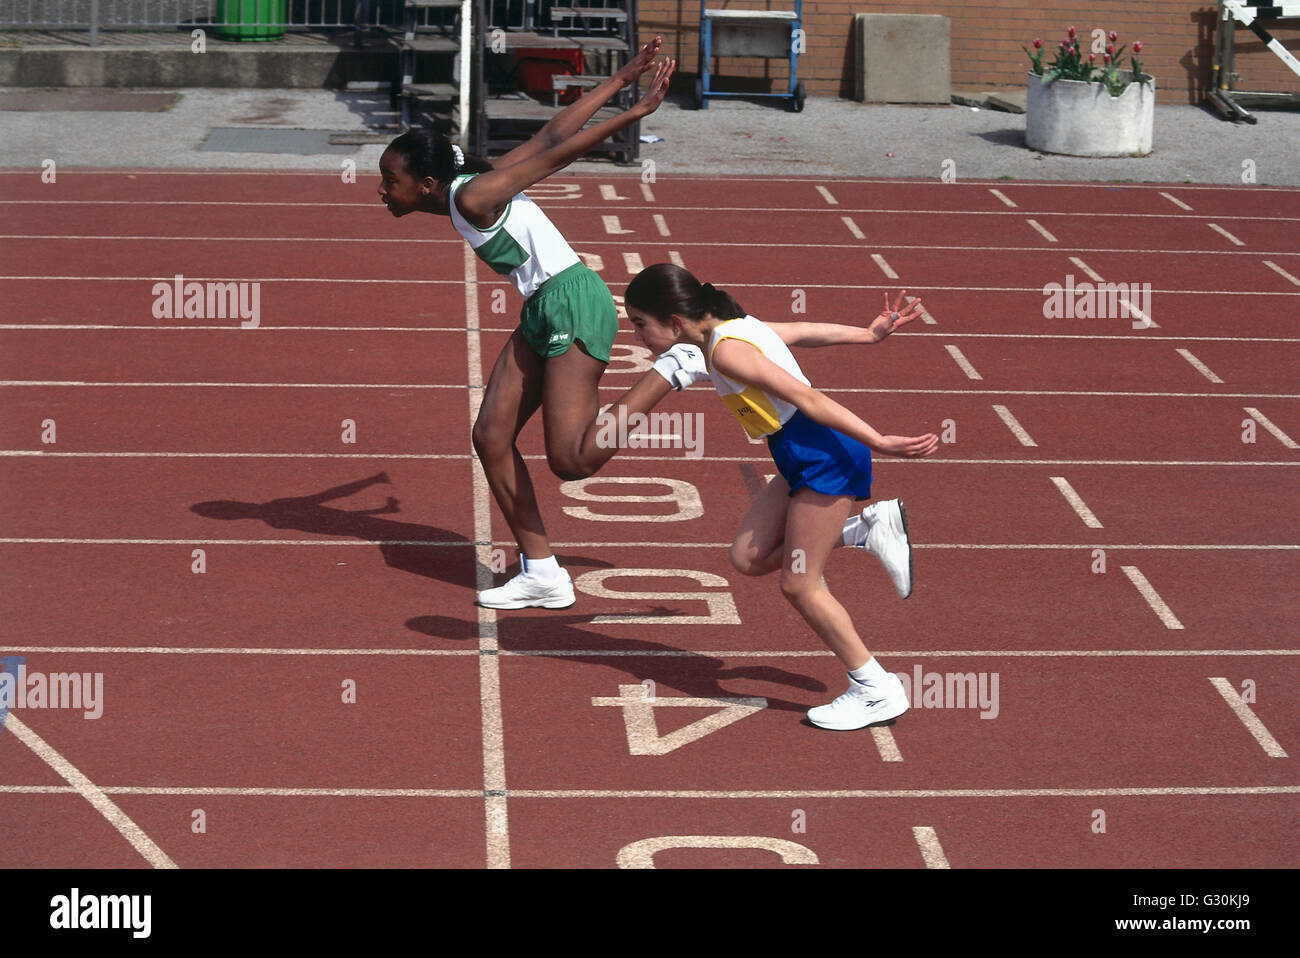 Two Girls Finishing a Race, at Finishing Line on Track. Stock Photo